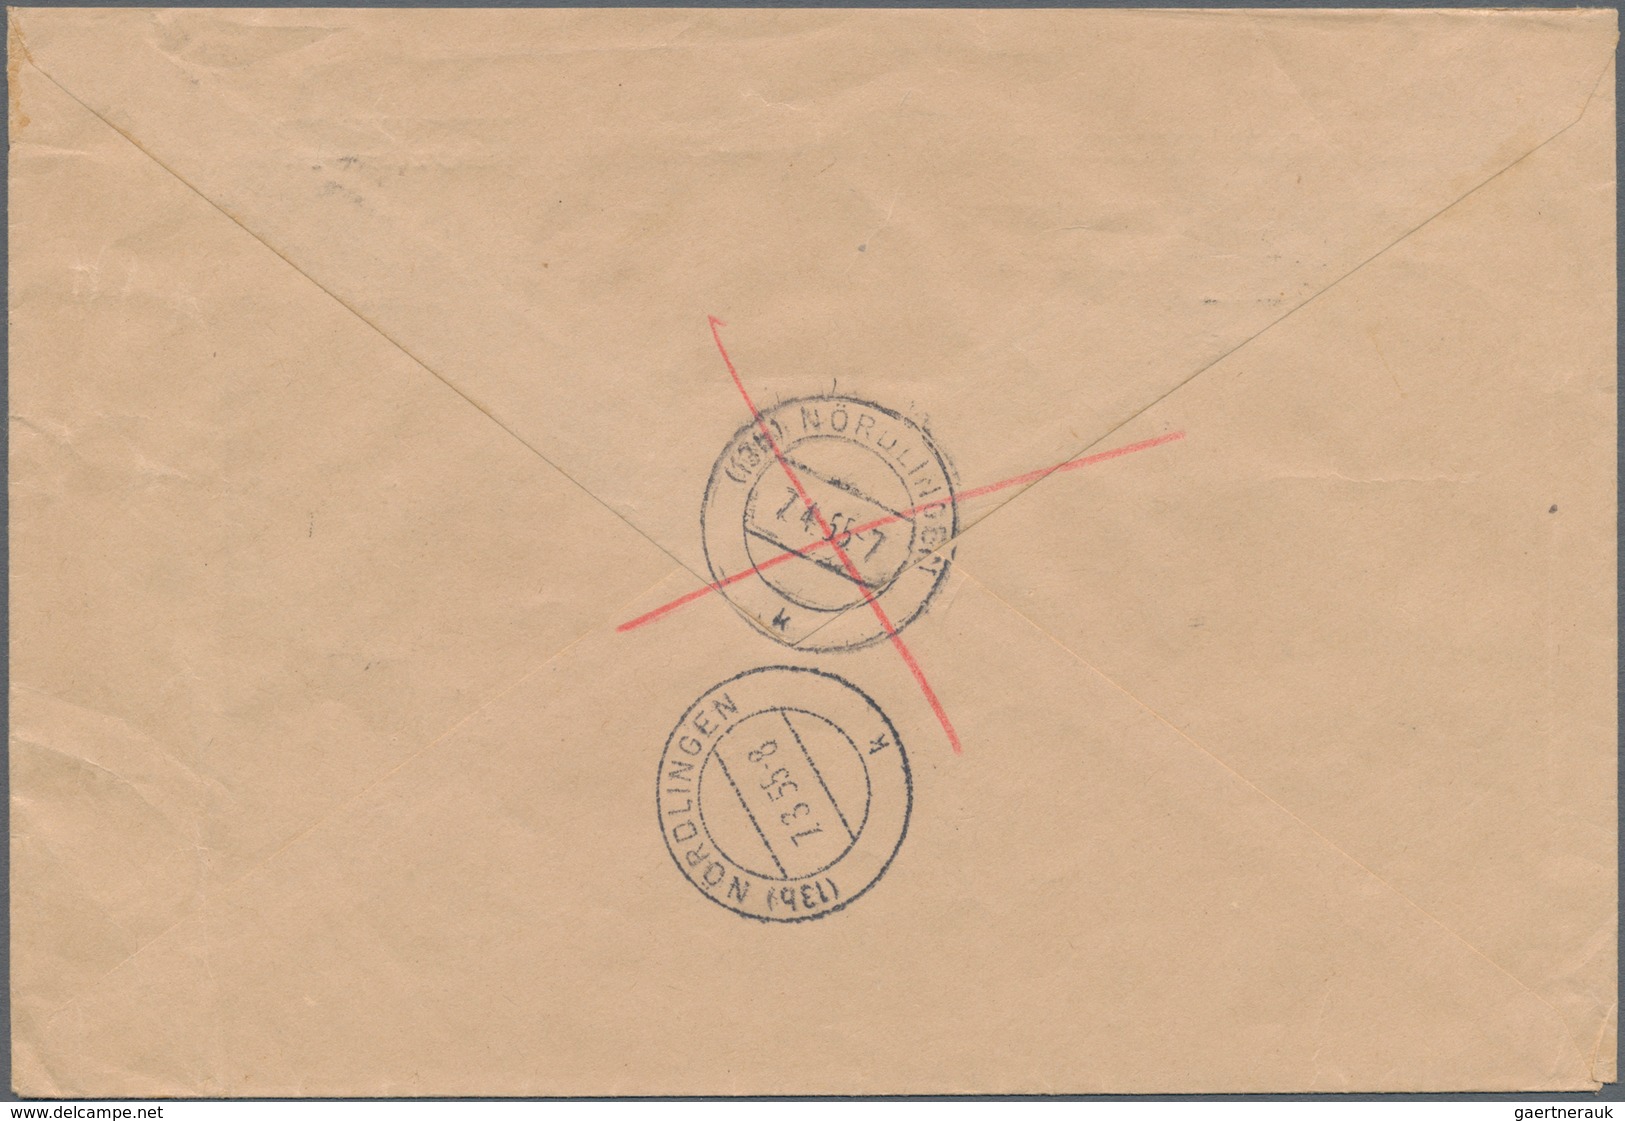 Syrien: 1952/1955, Three Registered Letters From "Republique Syrienne Direction Generale Des Postes" - Syrië